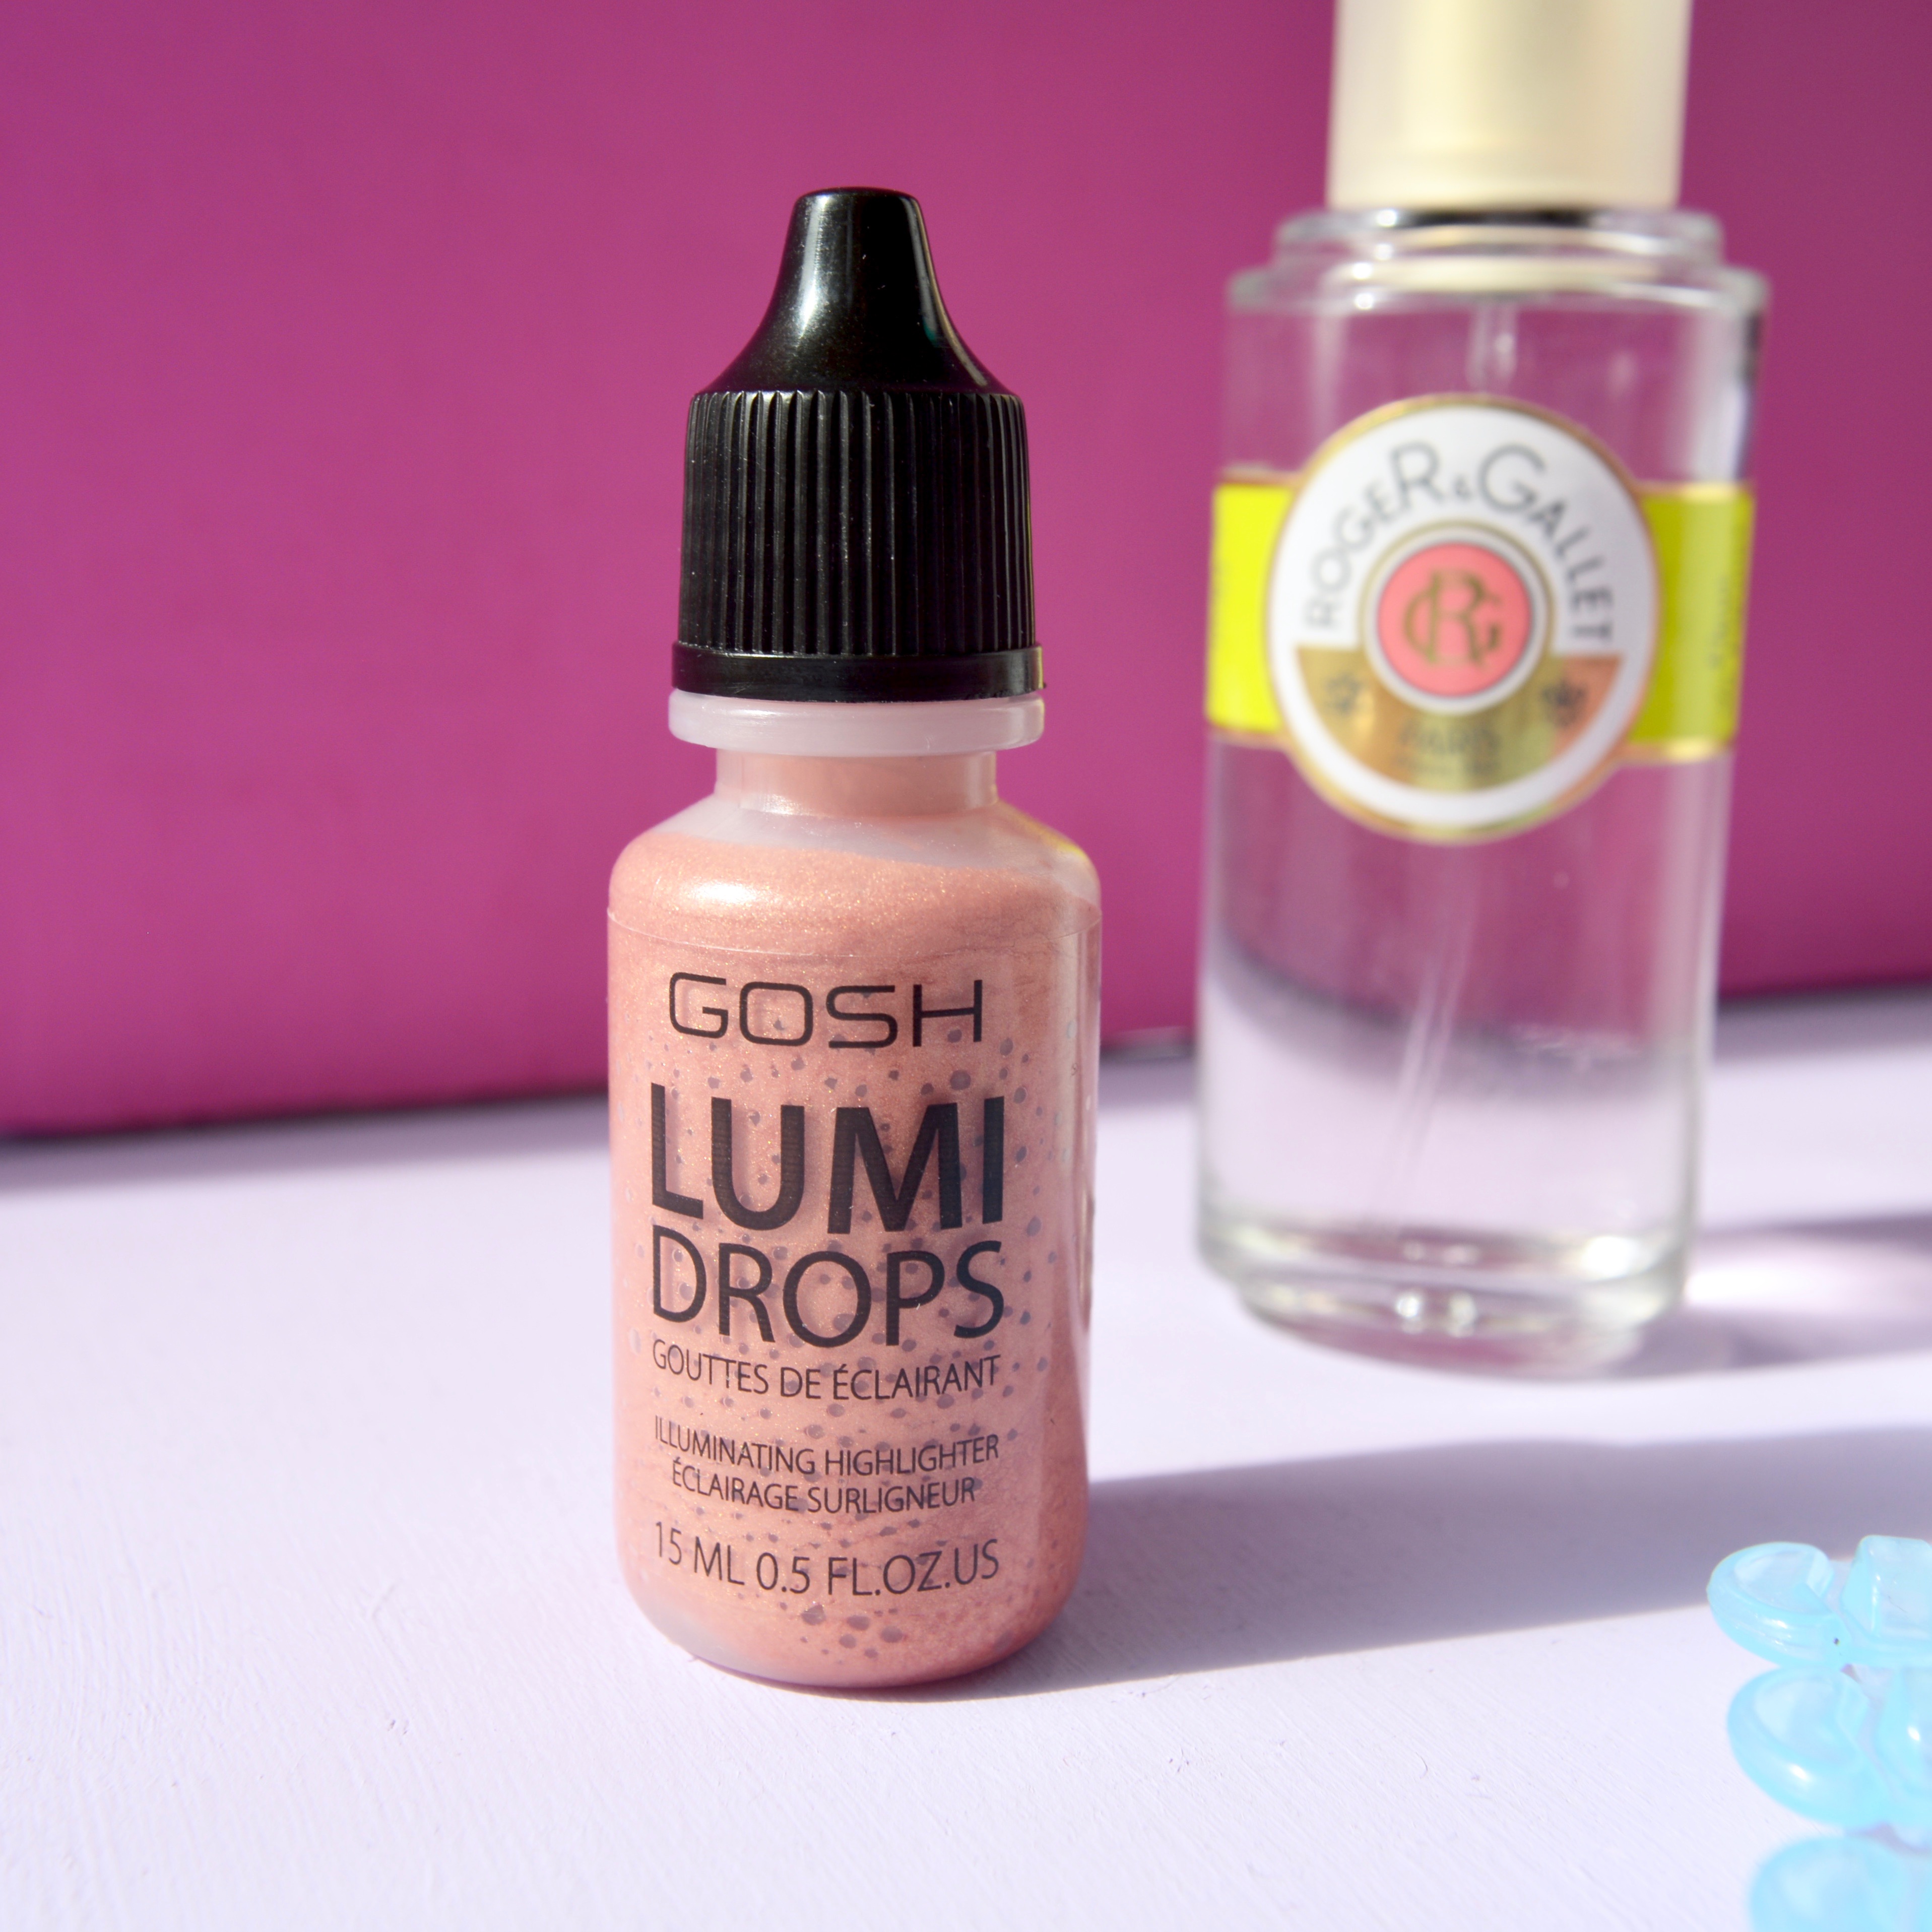 Friday Faves: GOSH Lumi Drops, the new rose gold fluid highlighter